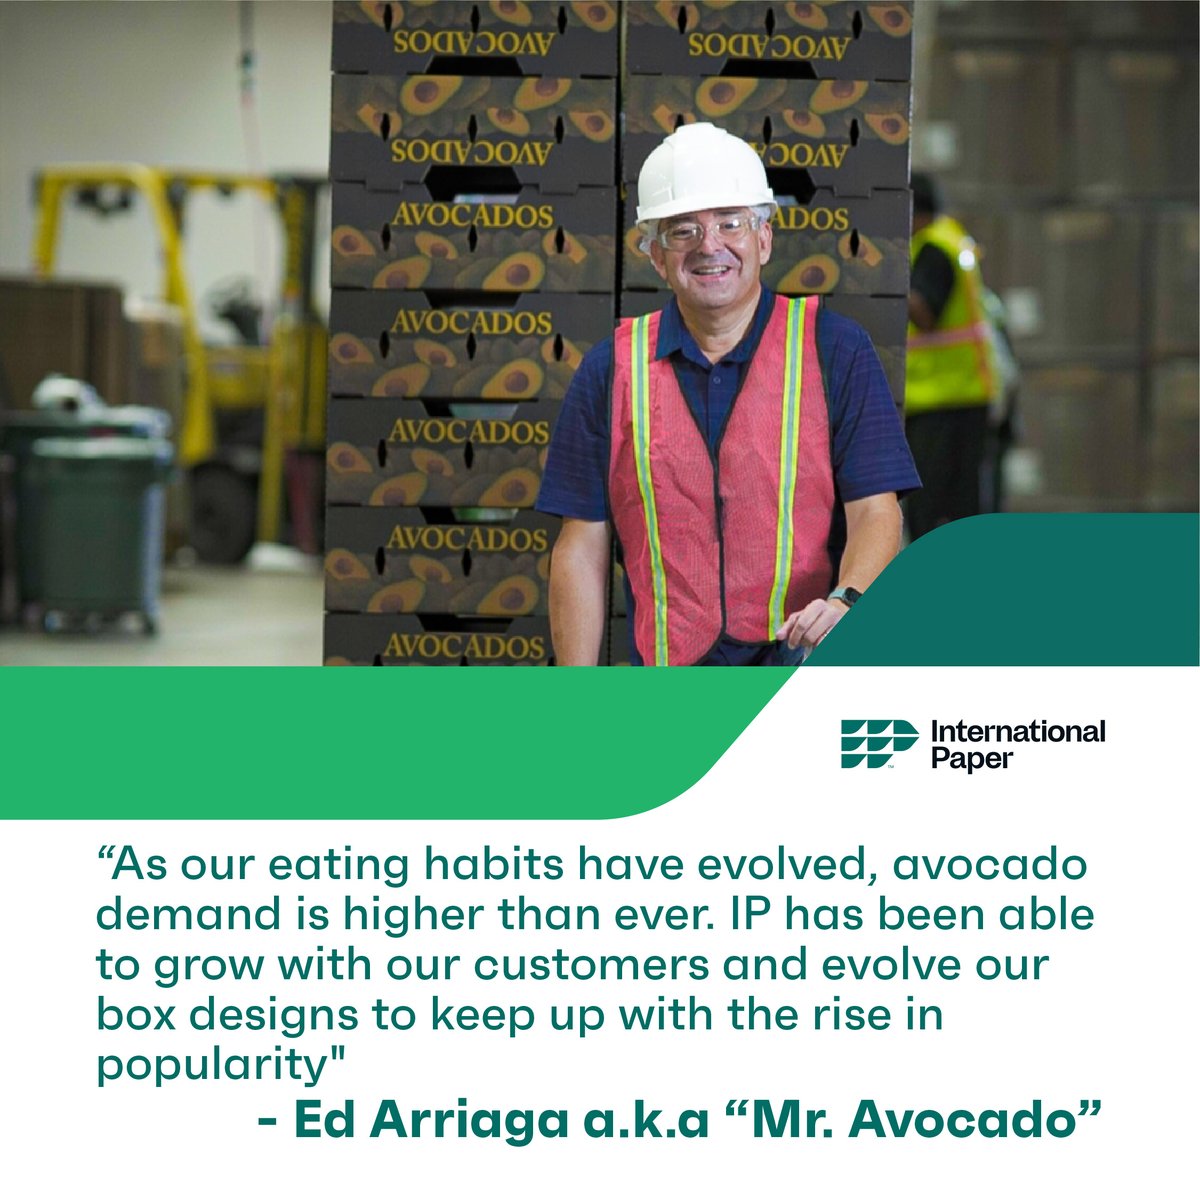 'Our customers have complete confidence that we will provide the highest quality box, customized to their specific needs.' Ed Arriaga is about to begin his 28th harvest year as IP's resident avocado 🥑 📝 expert. Read his story on our website: bit.ly/3wo8Pgq